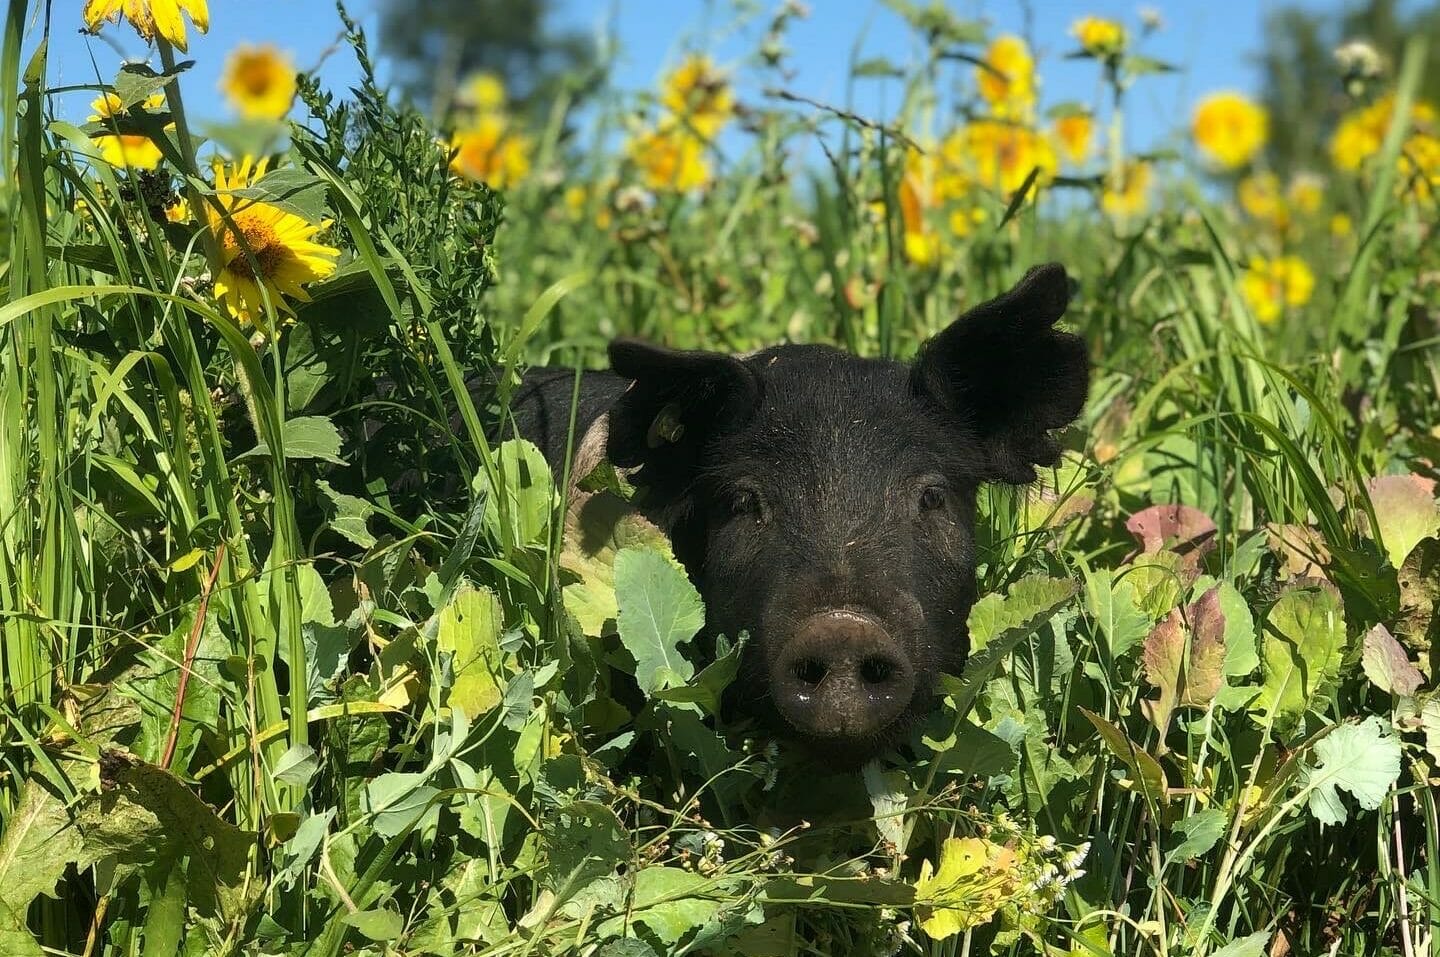 Pig in sunflowers